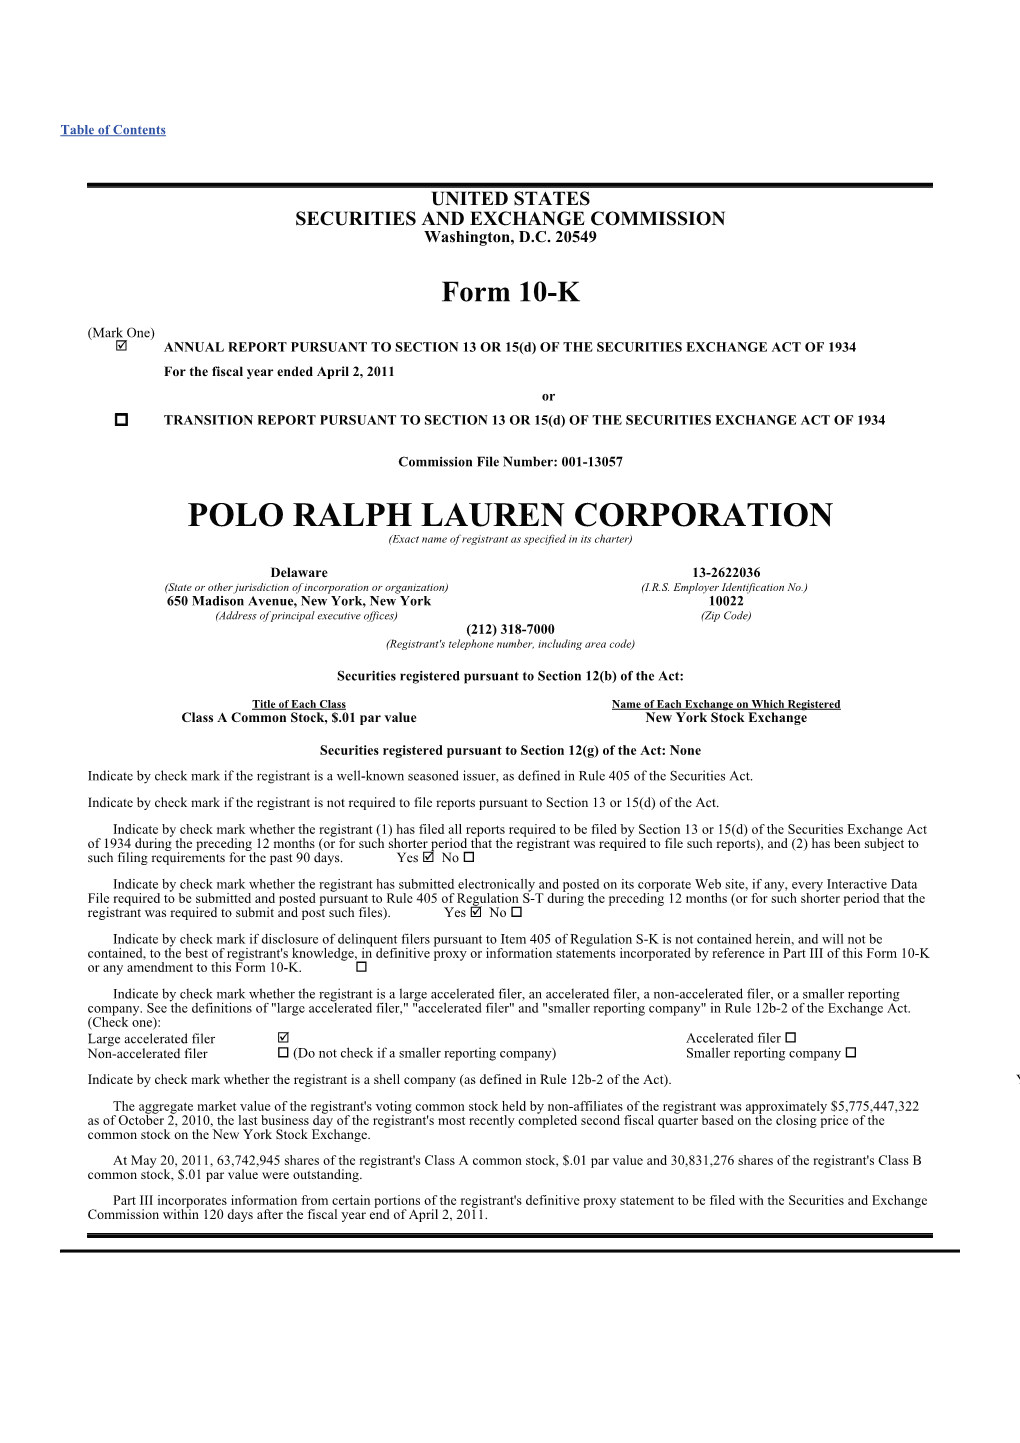 POLO RALPH LAUREN CORPORATION (Exact Name of Registrant As Specified in Its Charter)